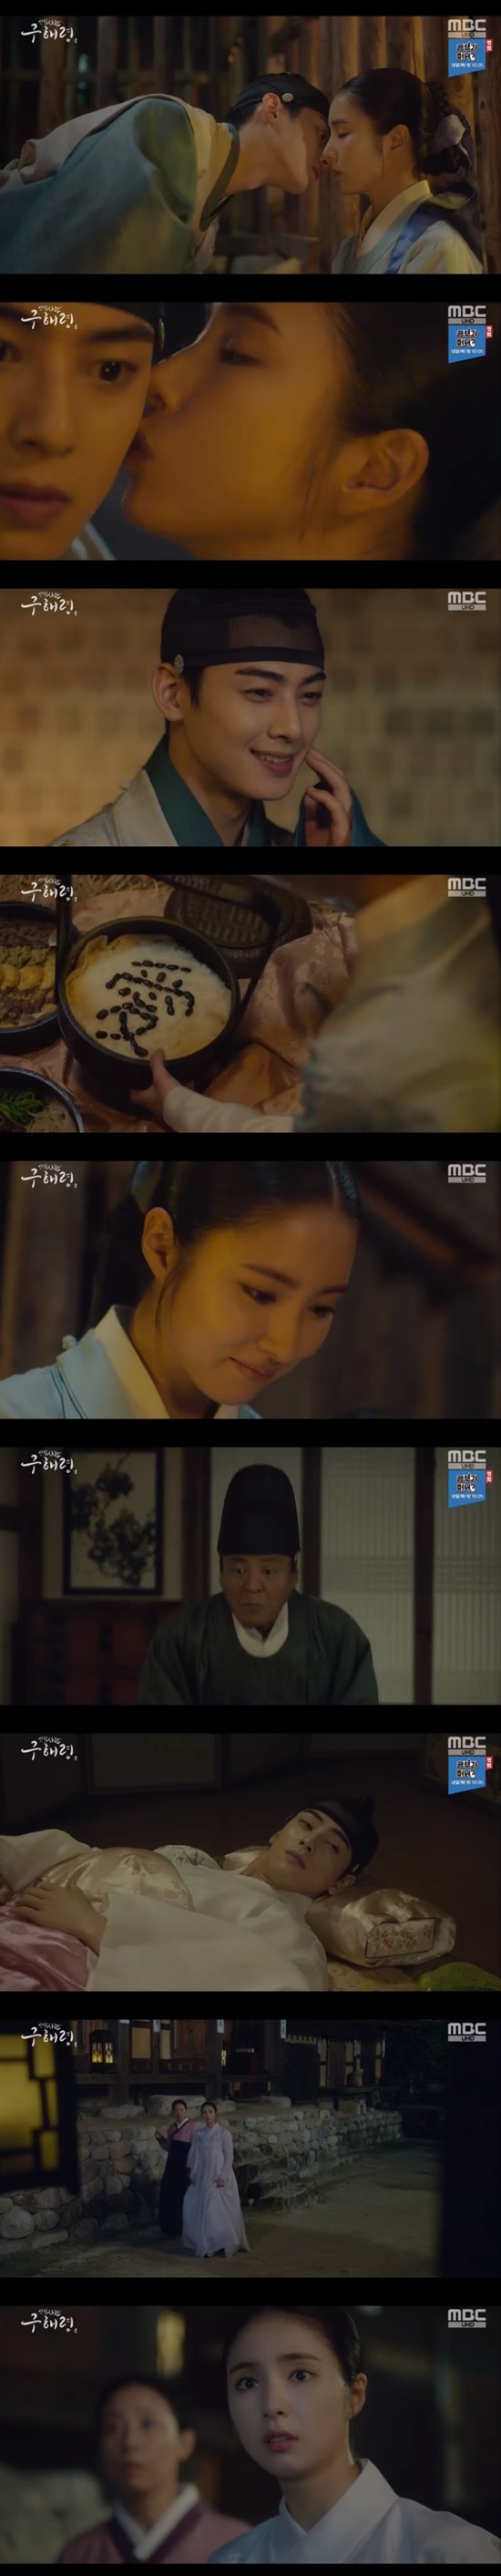 Shin Se-kyung is also in DDanger.In the 21-22 MBC drama Rookie Historian Goo Hae-ryungplayplayed by Kim Ho-soo/directed by Kang Il-soo Han Hyun-hee), which was broadcast on August 21, DDanger of Rookie Historian Goo Hae-ryung (Shin Se-kyung) was predicted.Rookie Historian Goo Hae-ryung was caught listening to the conversation between the king (Kim Min-sang) and Min-ik-pyeong (Choi Deok-moon) under the direction of Min Woo-won (Lee Ji-hoon), and was trapped in prison, refusing to show his remorse despite asking Wang Yi What did you write down?When the officer Rookie Historian Goo Hae-ryung was imprisoned for breaking the name, Lee Lims worries exploded.The inner hall, Heo Sam-bo (the Holy Land) dried such an irim, and Irim was worried that Rookie Historian Goo Hae-ryung was in the imagination of receiving the medicine, but he could not raise the Danger of the king.Irim did not go to the jade until late at night, and I took pillows and food because Rookie Historian Goo Hae-ryung was uncomfortable.Rookie Historian Goo Hae-ryung laughed, saying, It will be the first time a female jade barrassing.Lee said that Rookie Historian Goo Hae-ryung would go with him when he came home, and Rookie Historian Goo Hae-ryung replied that he was tired and disliked.Look at it, he said, and took his face close.When Lee and Rookie Historian Goo Hae-ryung were about to kiss, Hussambo said, Its time. When I broke DDanger, Rookie Historian Goo Hae-ryung conveyed his heart to Bolkis.The hanlims of the hanmun hall began protesting when they demanded the inspection of the municipal government, which is the basis of the annals, saying that they would overcome Wang Yi officers after Rookie Historian Goo Hae-ryung was trapped in the jade.An appeal was made to pinpoint the kings fault, and Min Woo-won raised an appeal to the branch, asking me to hit my head if I would not take the axe and take the inspection of the municipal government.Sungkyunkwan Yusaeng started the Hogokkwondang with a song.As things got bigger, Min Ik-pyeong persuaded the king that peoples attention will be focused on the contents of the days visit, and the king gave the intention of inspecting the municipal government and allowed the entrance examination.Rookie Historian Goo Hae-ryung was released, and Irim went to bed waiting for Rookie Historian Goo Hae-ryungs entrance examination.Rookie Historian Goo Hae-ryung could not sleep at the thought of Why is it so hot?He asked Rookie Historian Goo Hae-ryung to quit his job because his brother, Koo Jae-kyung (Fairy Hwan), said, It is not too late now. But Rookie Historian Goo Hae-ryung said, I have long hoped that I would be useful somewhere.And now I live in the same way. If I get angry, I think it is a price and I will pay it. Yoo Gyeong-sang